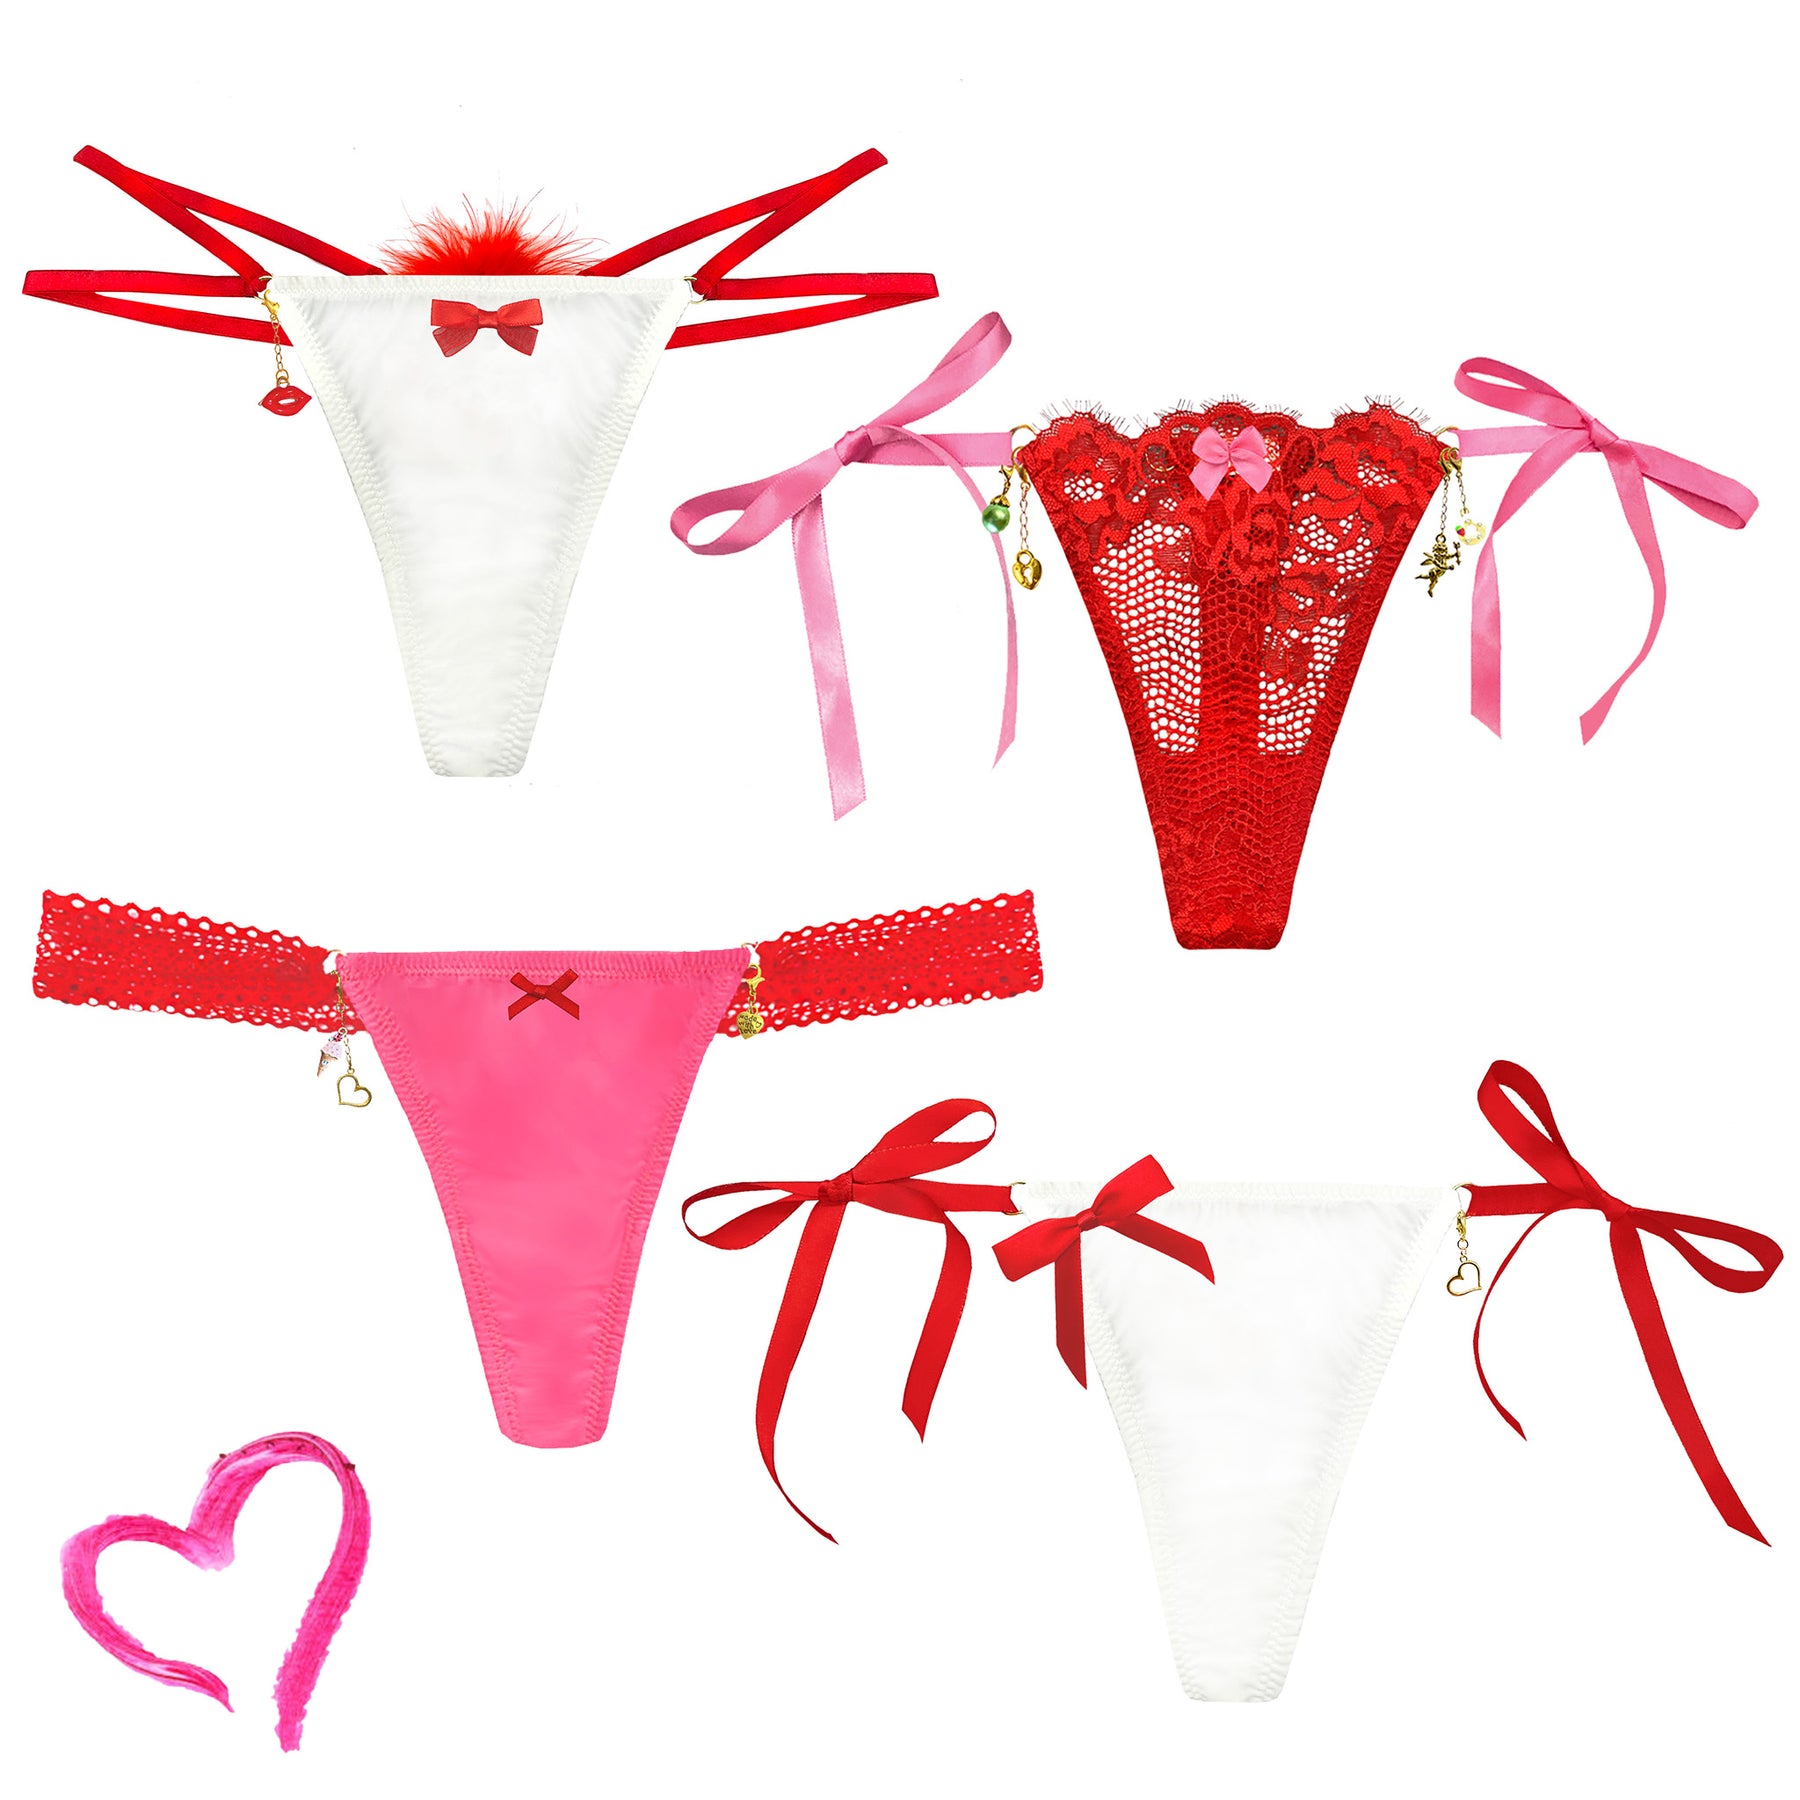 Lingerie : sexy and romantic panties for Valentine's Day